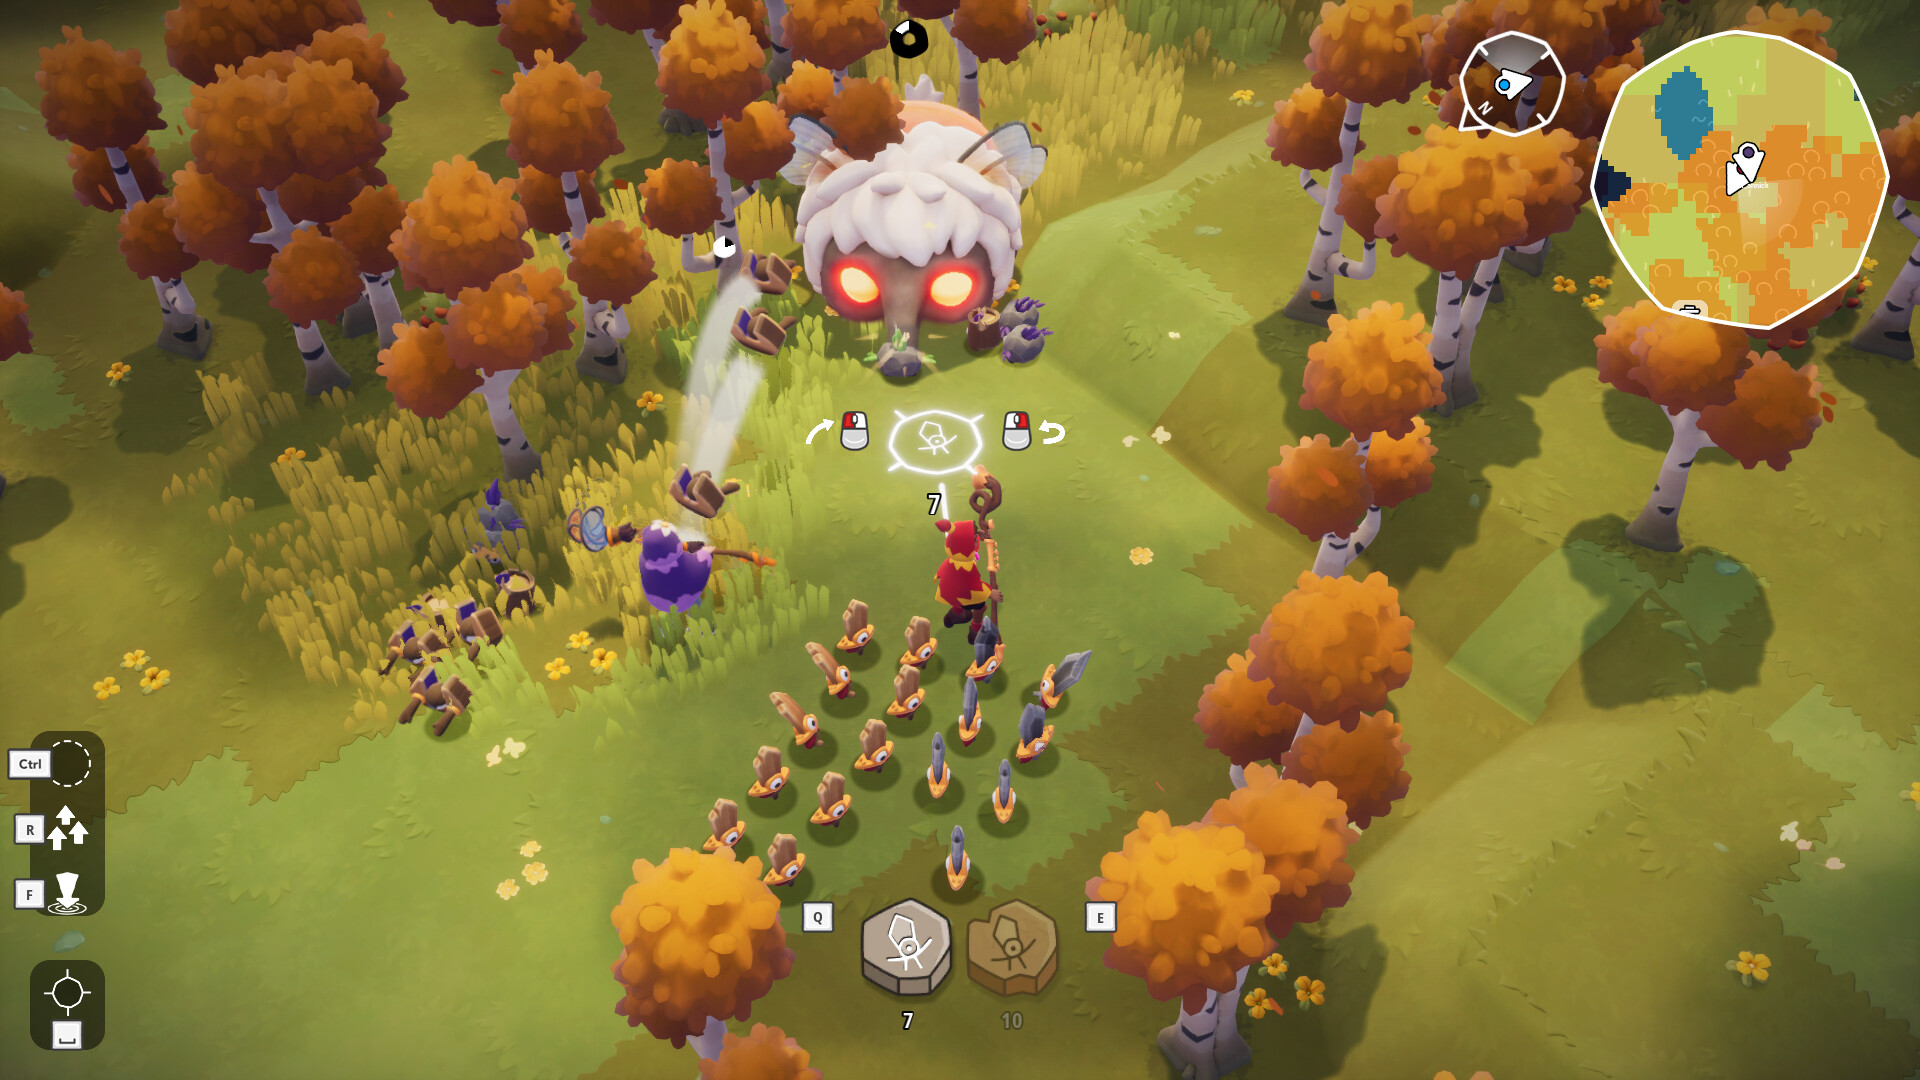  Check out Oddsparks, which is something like Pikmin by way of Factorio 